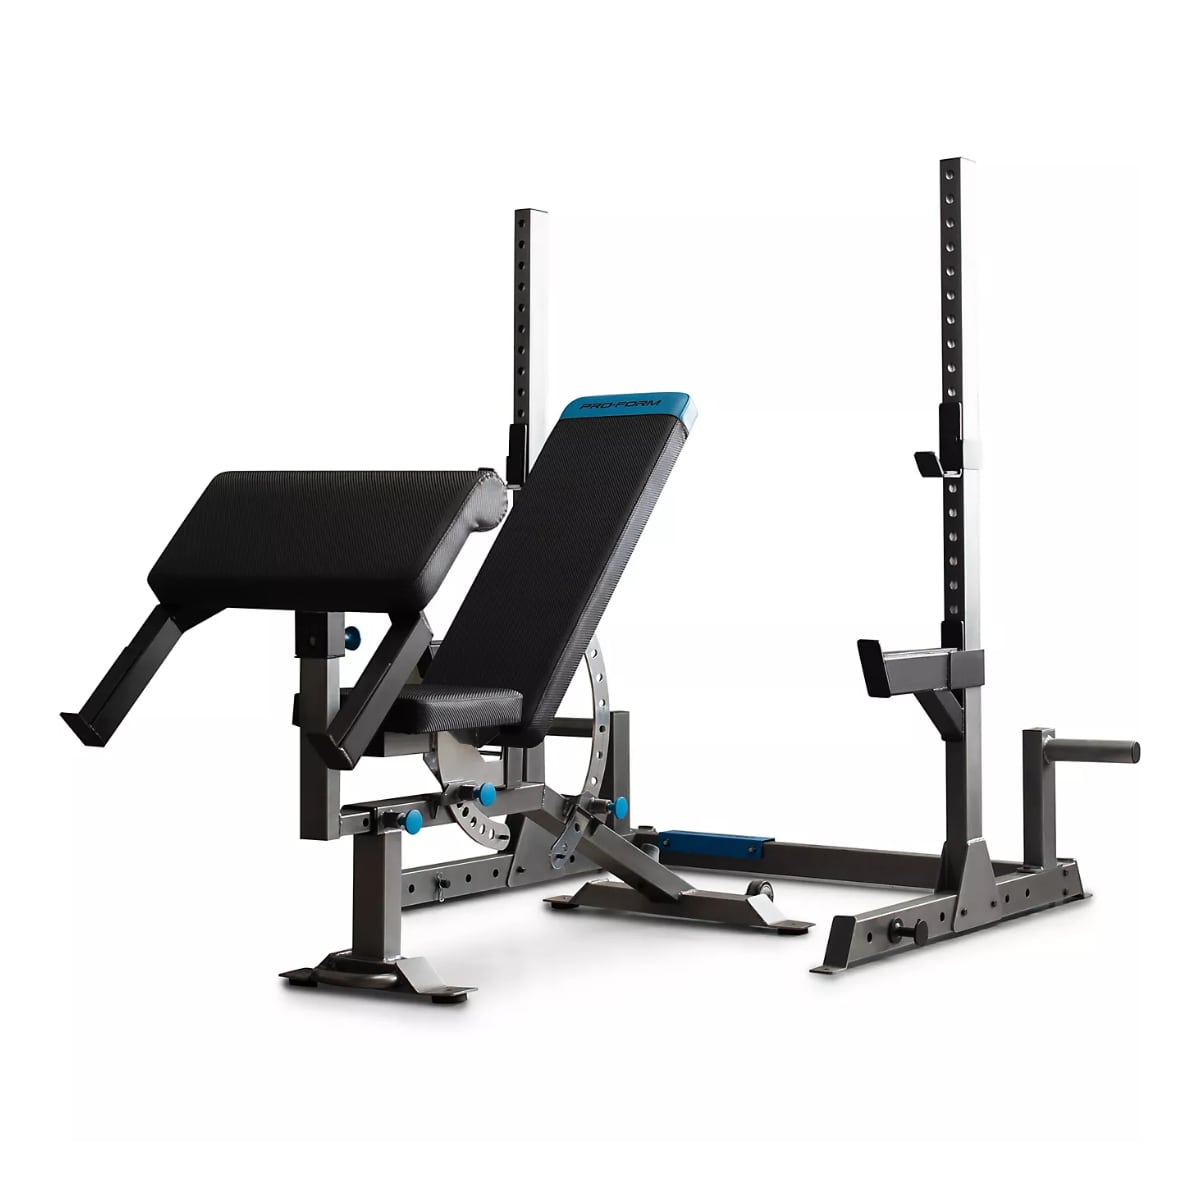 Proform Utility Bench With Rack